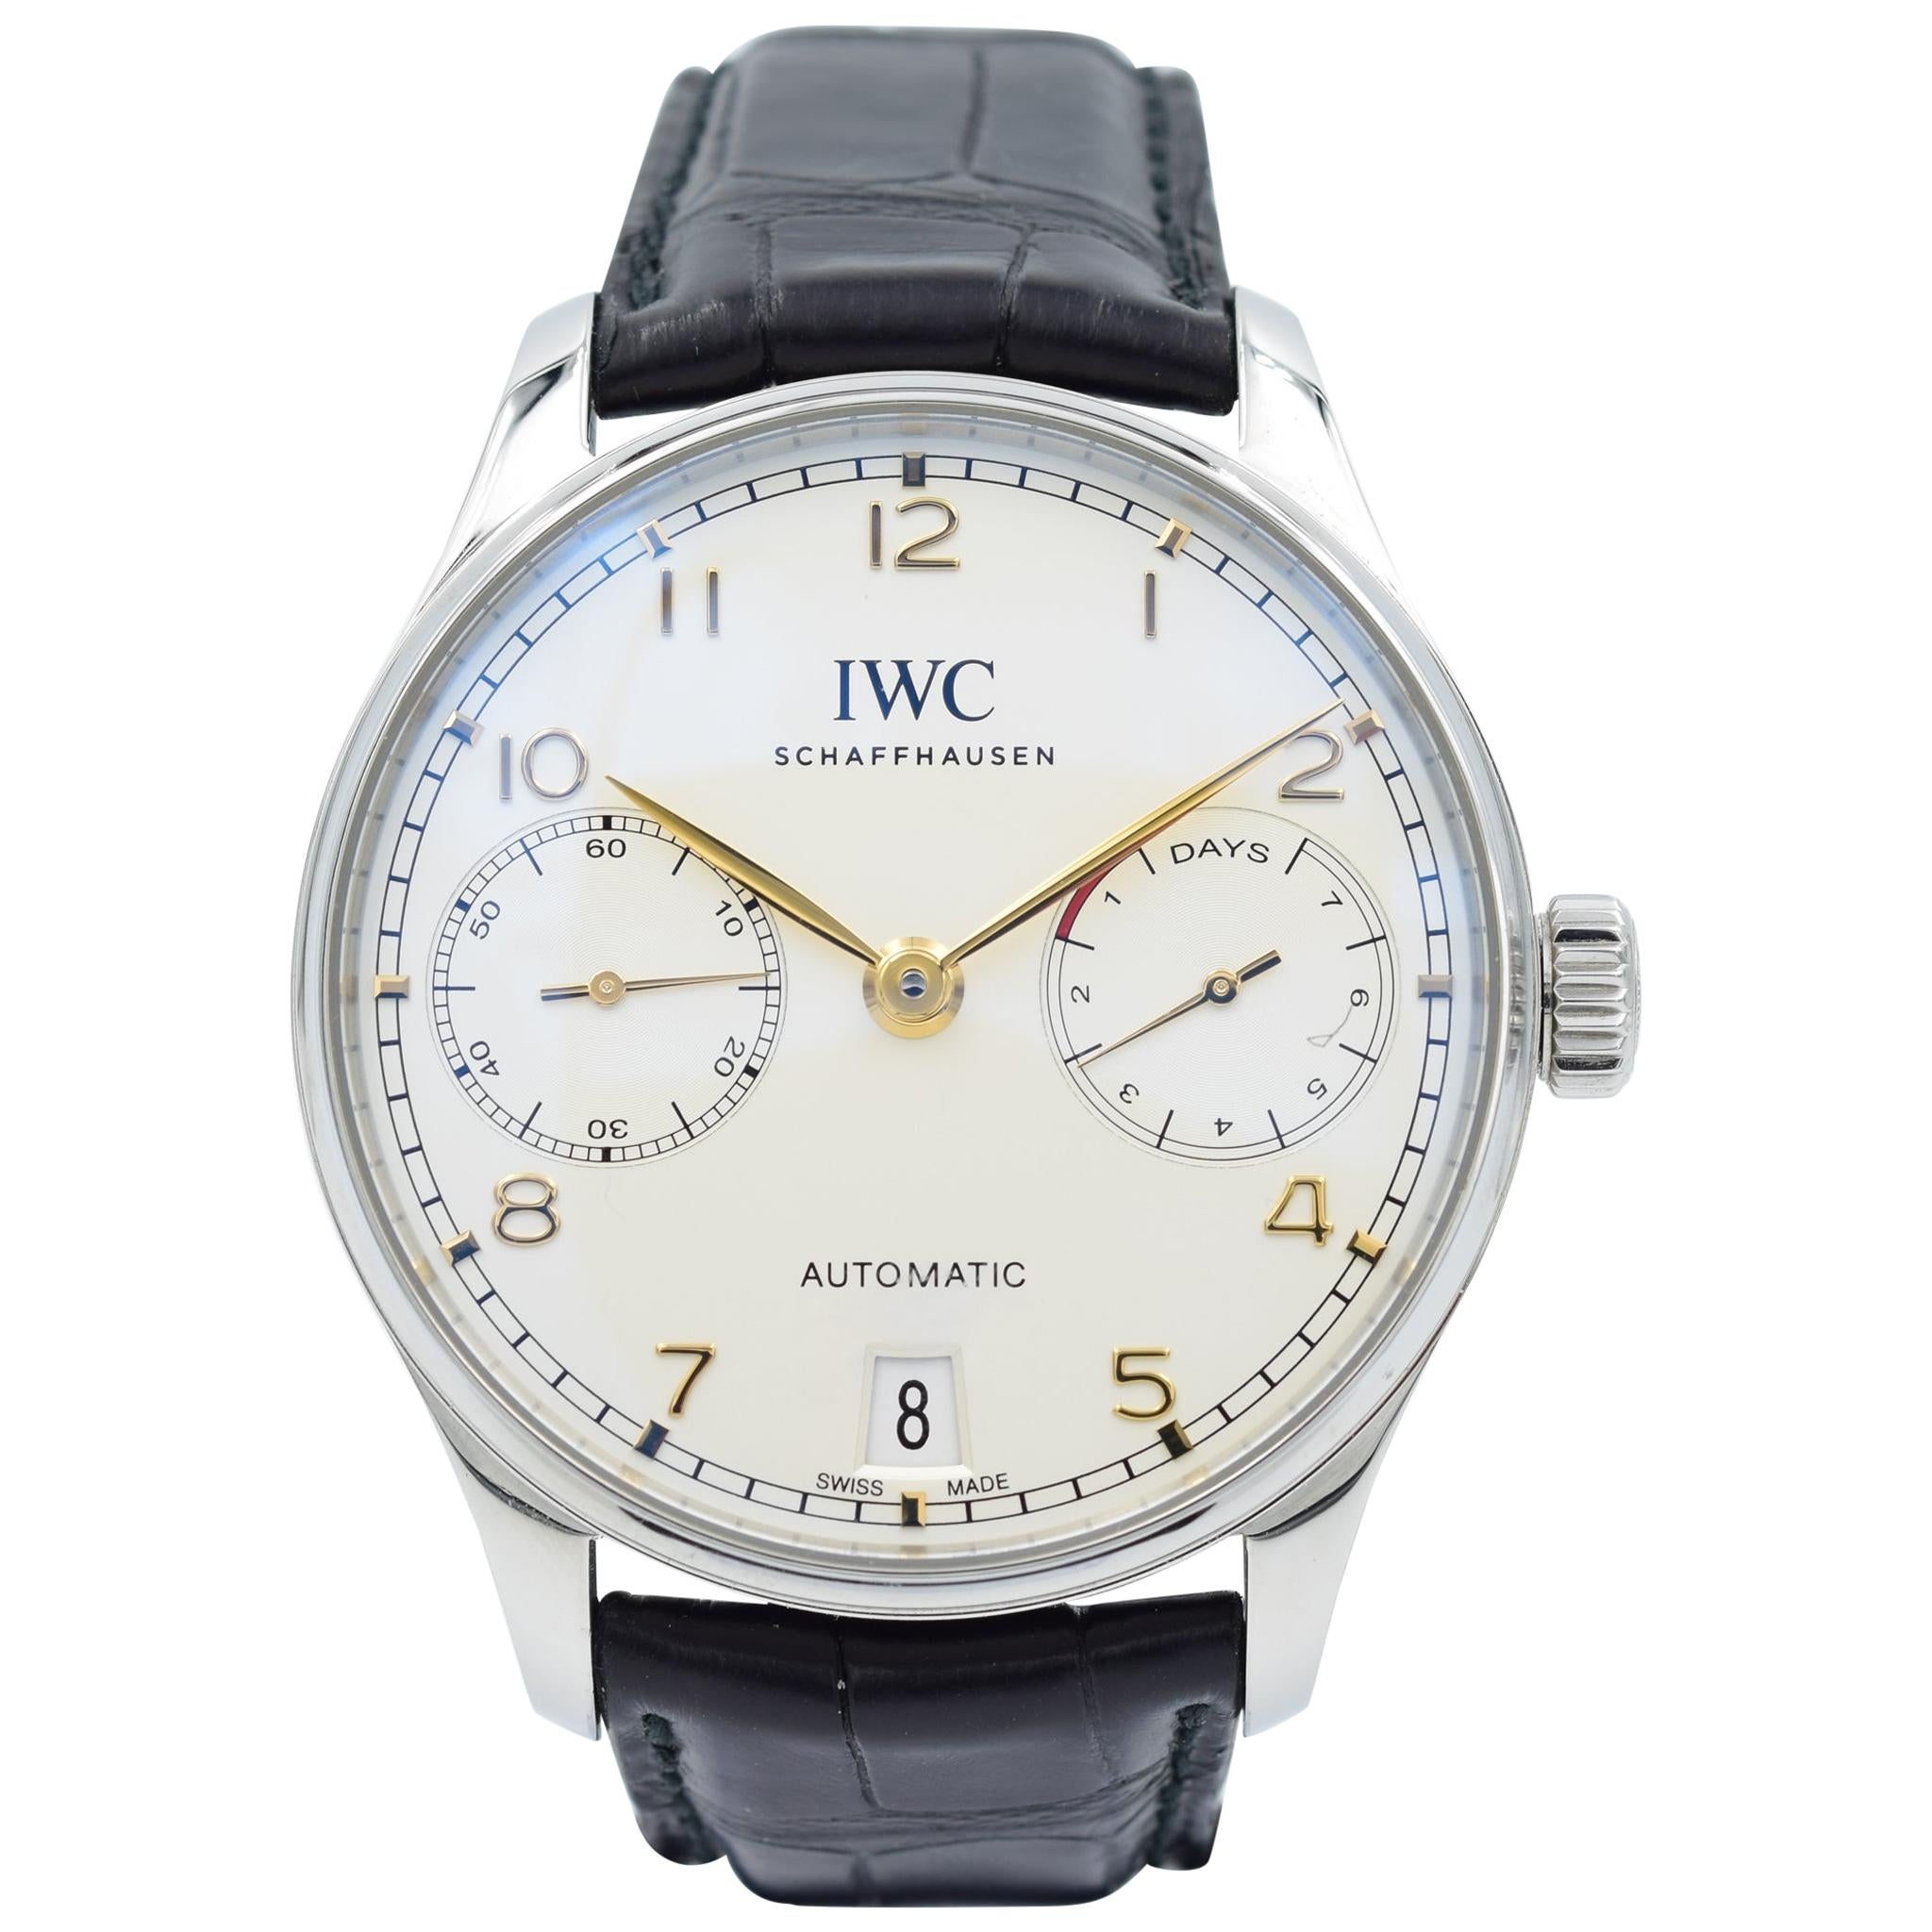 IWC Portugieser IW500704 Silver Dial 7 Day Power Reserve